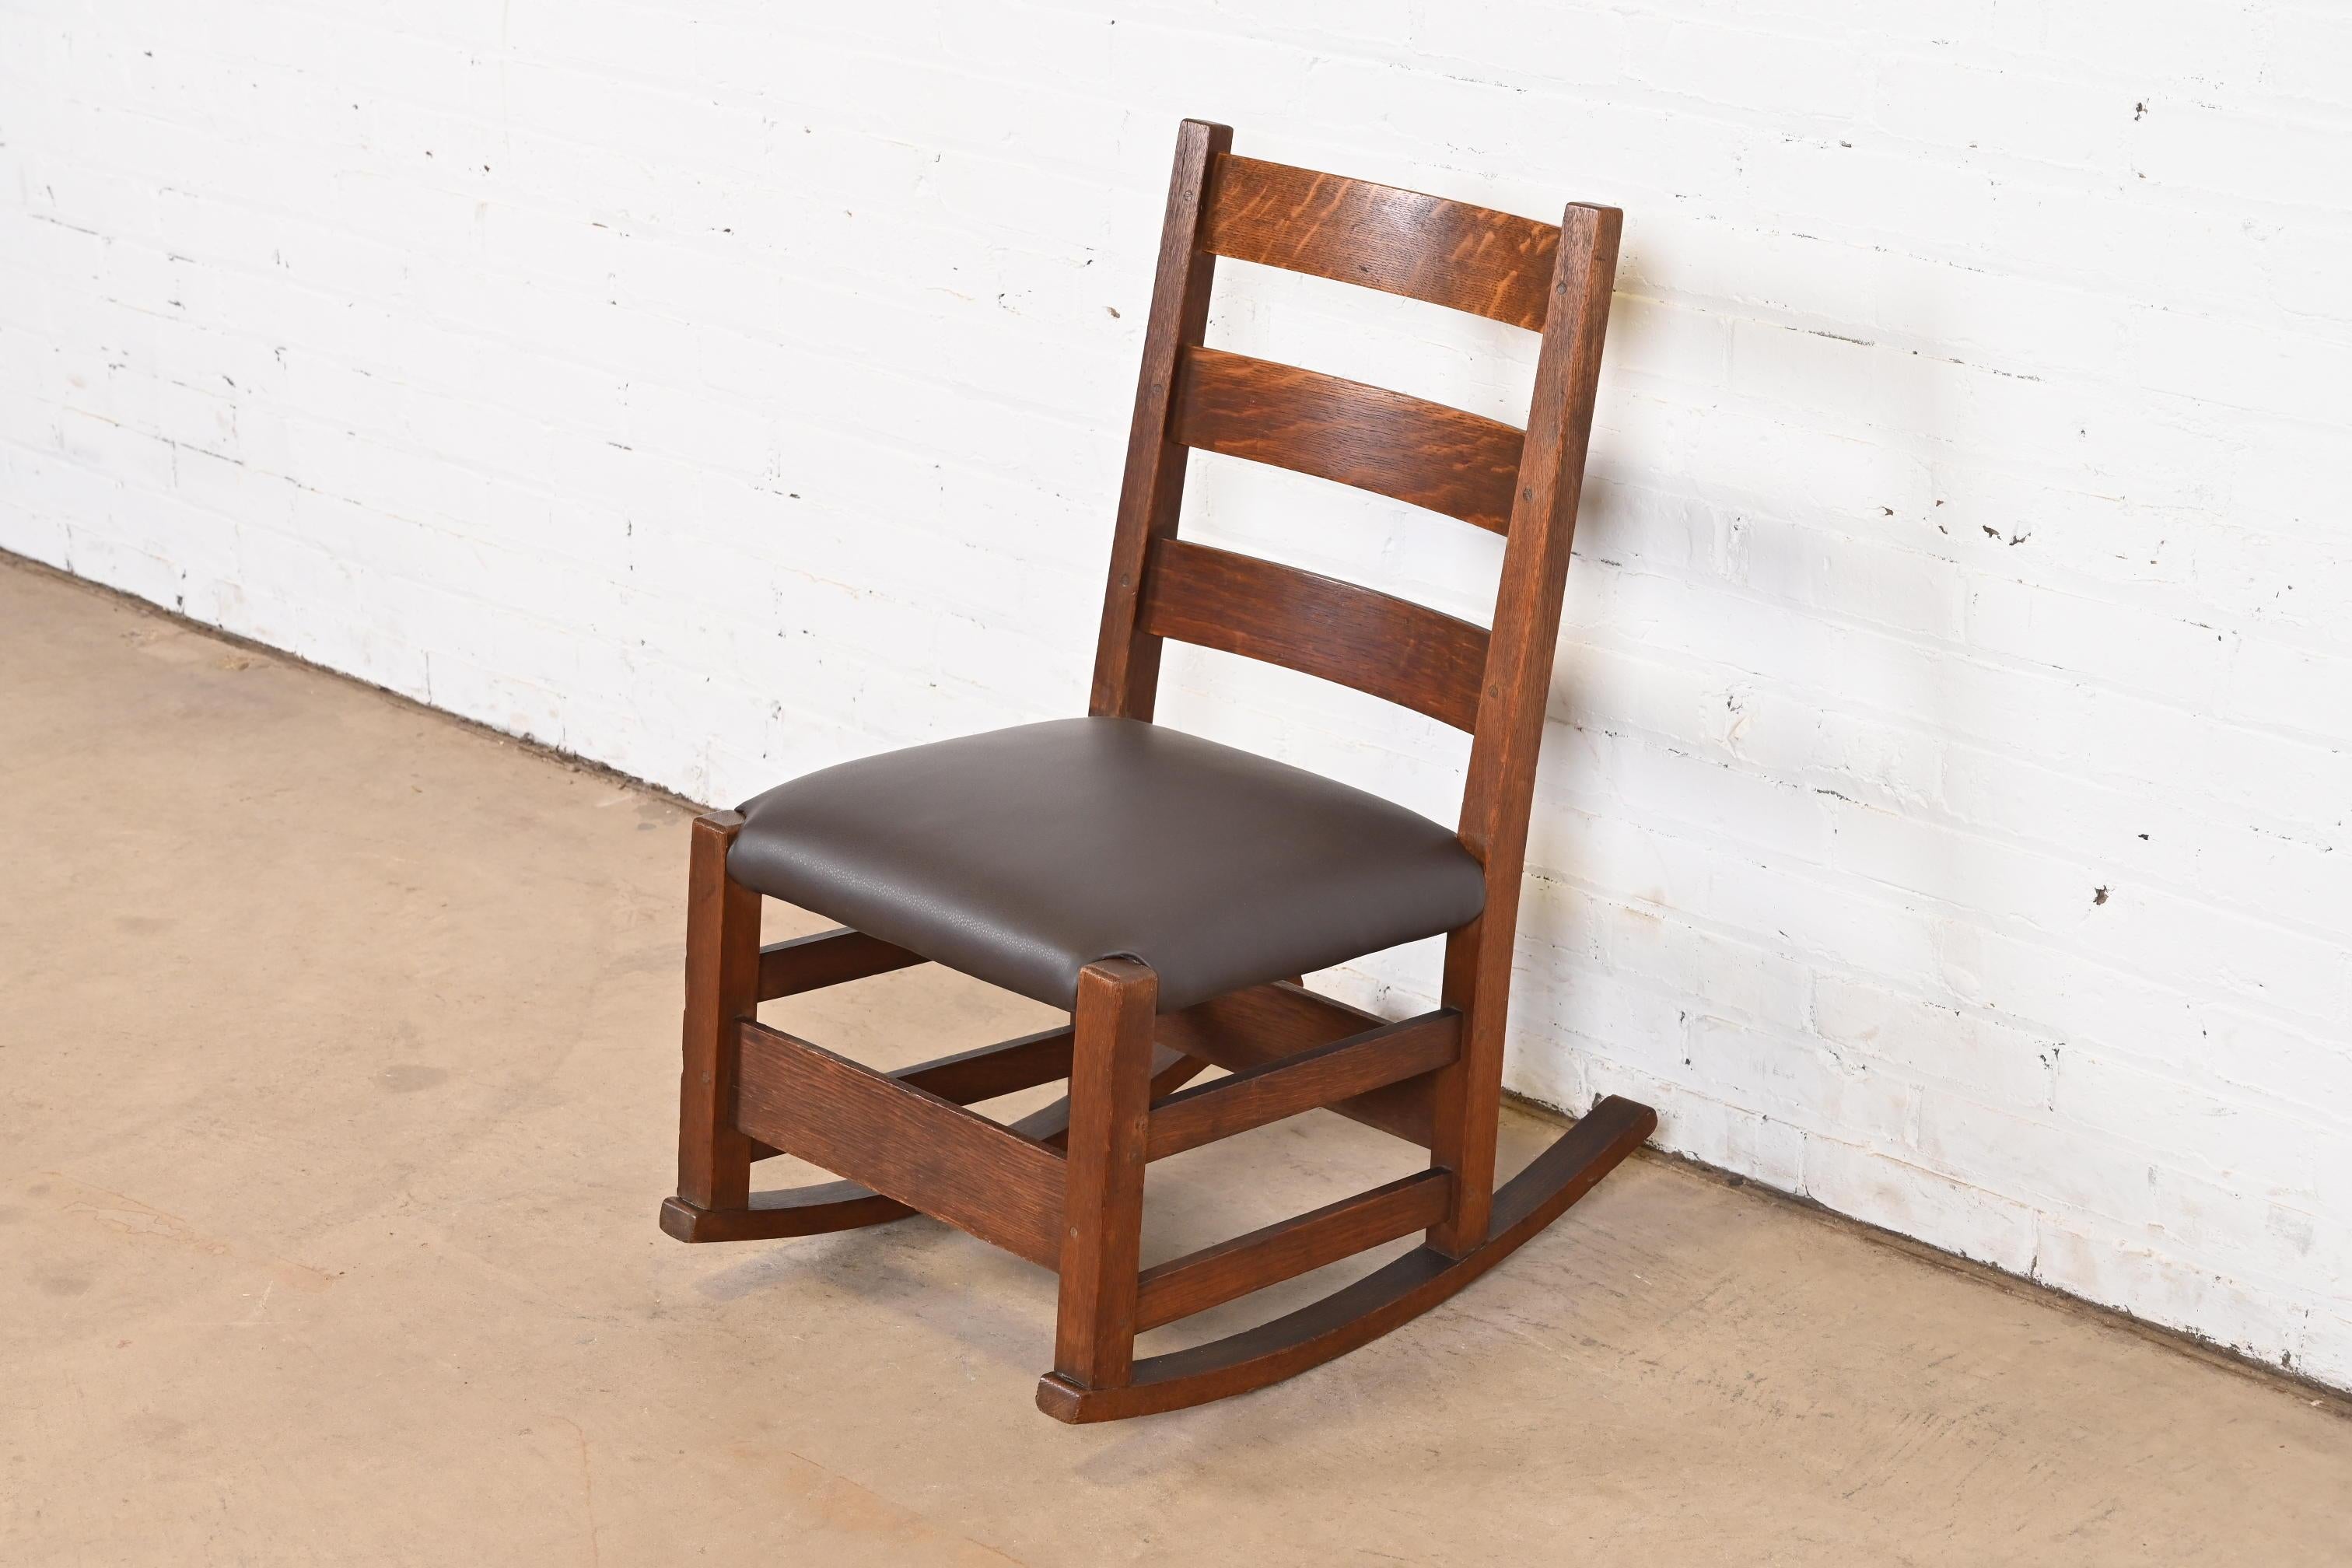 American Signed Gustav Stickley Antique Mission Oak Arts & Crafts Sewing Rocking Chair For Sale